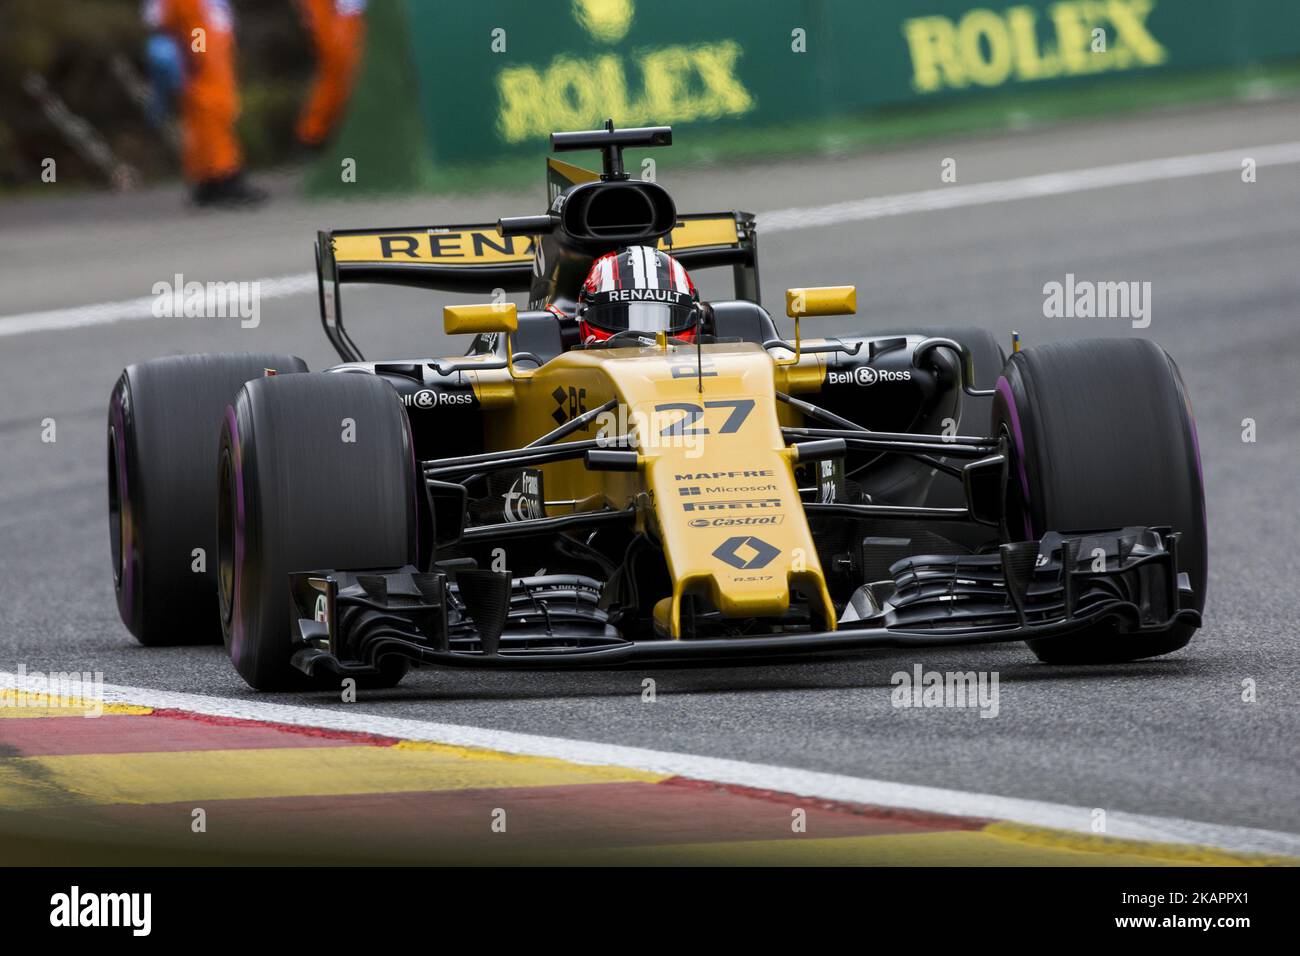 27 HULKENBERG Nico from Germany of team Renault Sport F1 team during the Formula One Belgian Grand Prix at Circuit de Spa-Francorchamps on August 25, 2017 in Spa, Belgium. (Photo by Xavier Bonilla/NurPhoto) Stock Photo